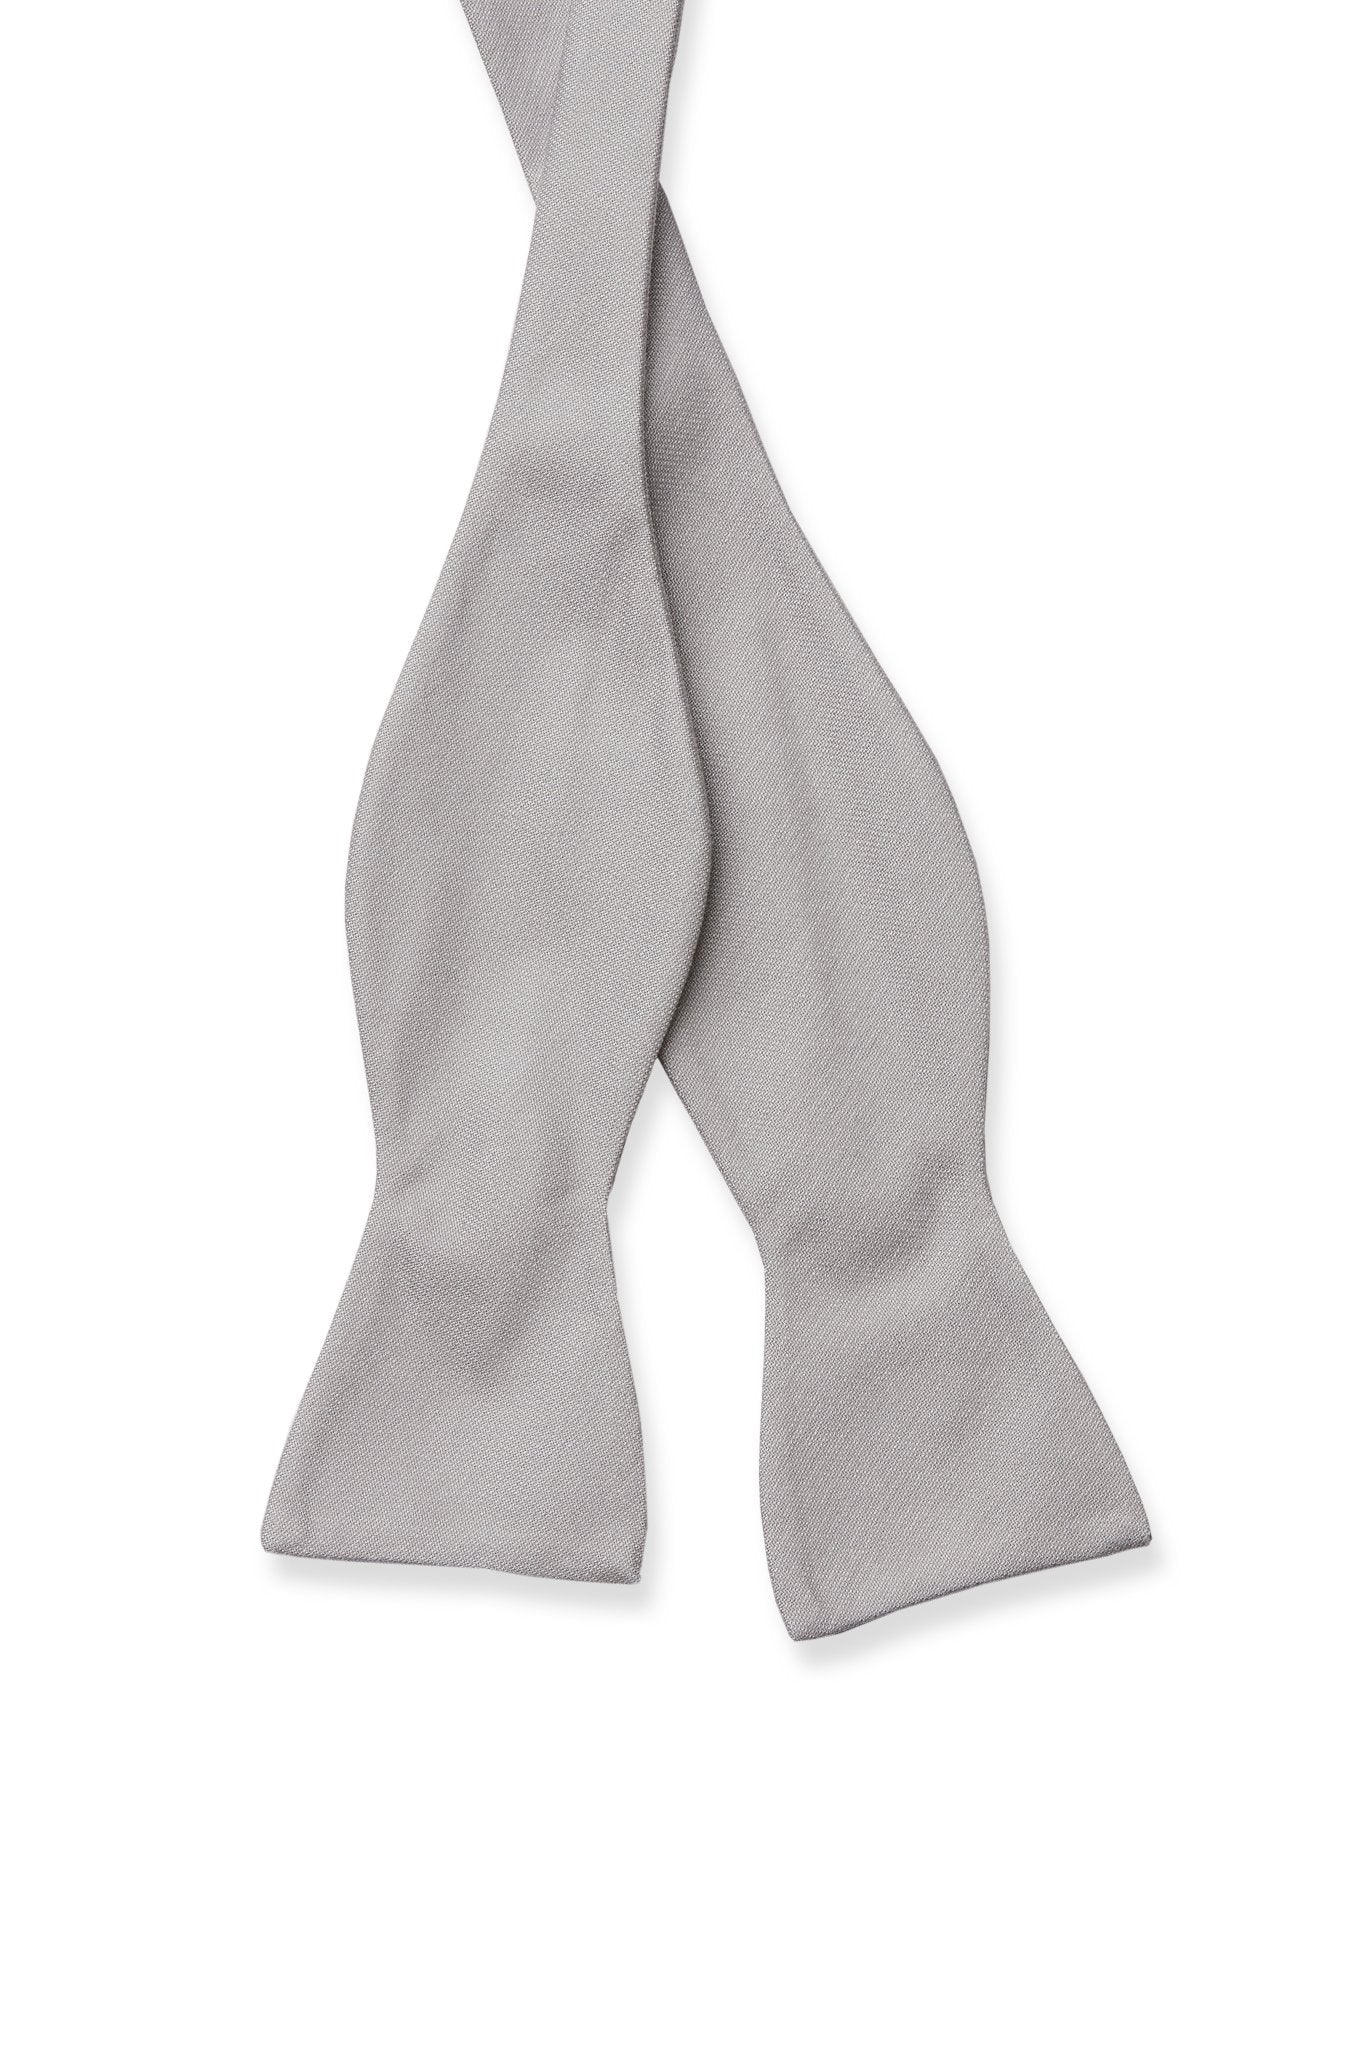 Daniel Bow Tie in silver by Birdy Grey, front view